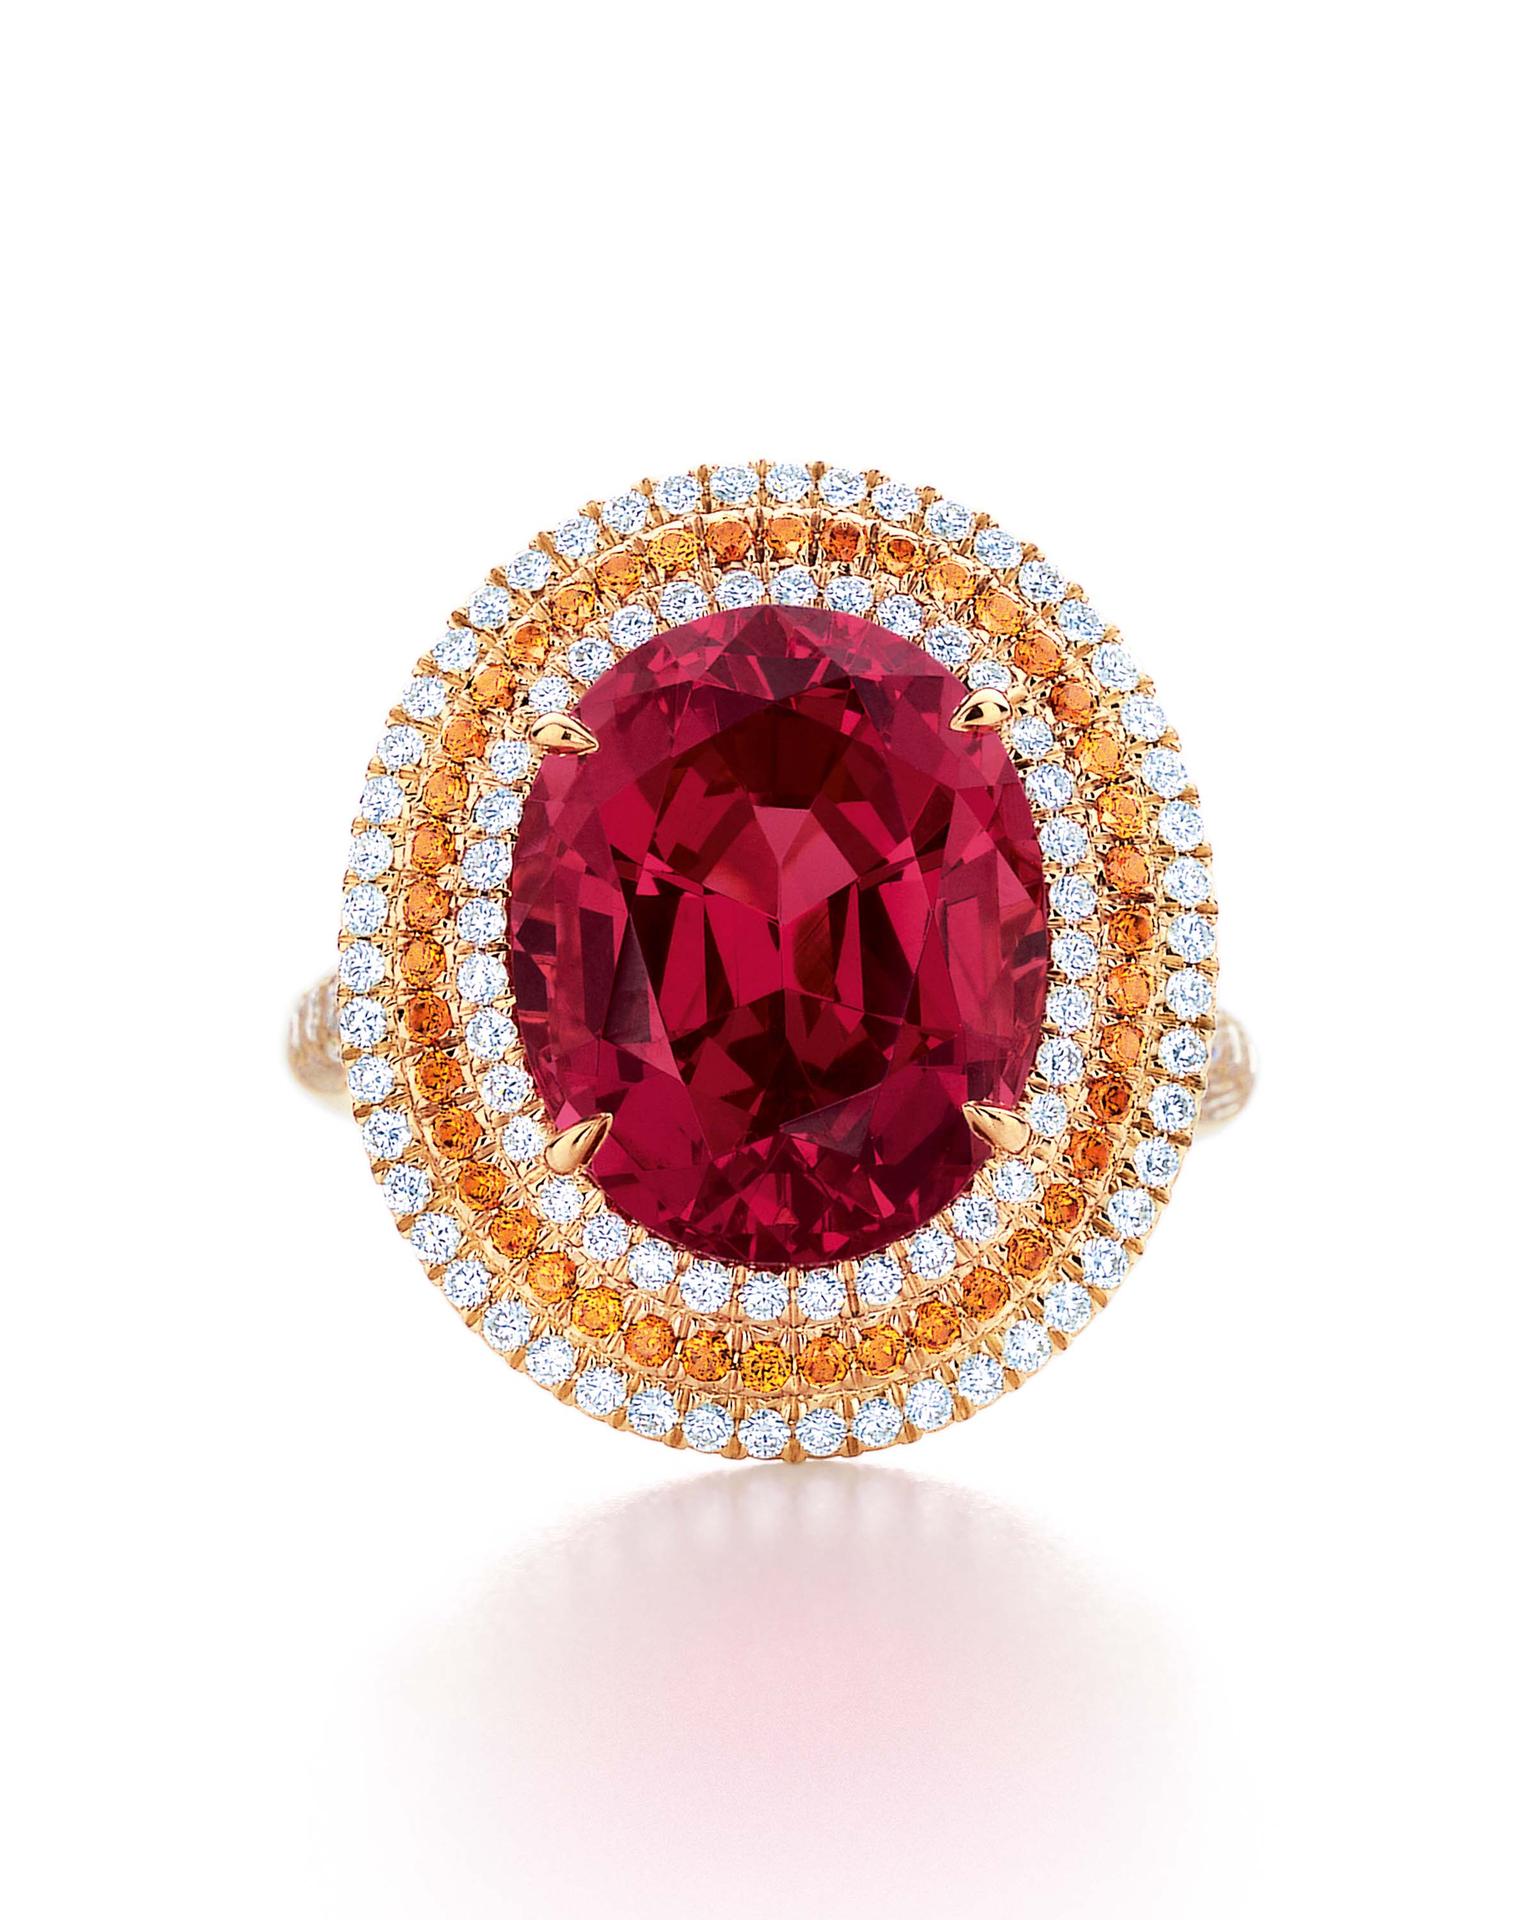 Tiffany & Co. Blue Book Collection red spinel ring with spessartite garnets and white diamonds set in yellow gold